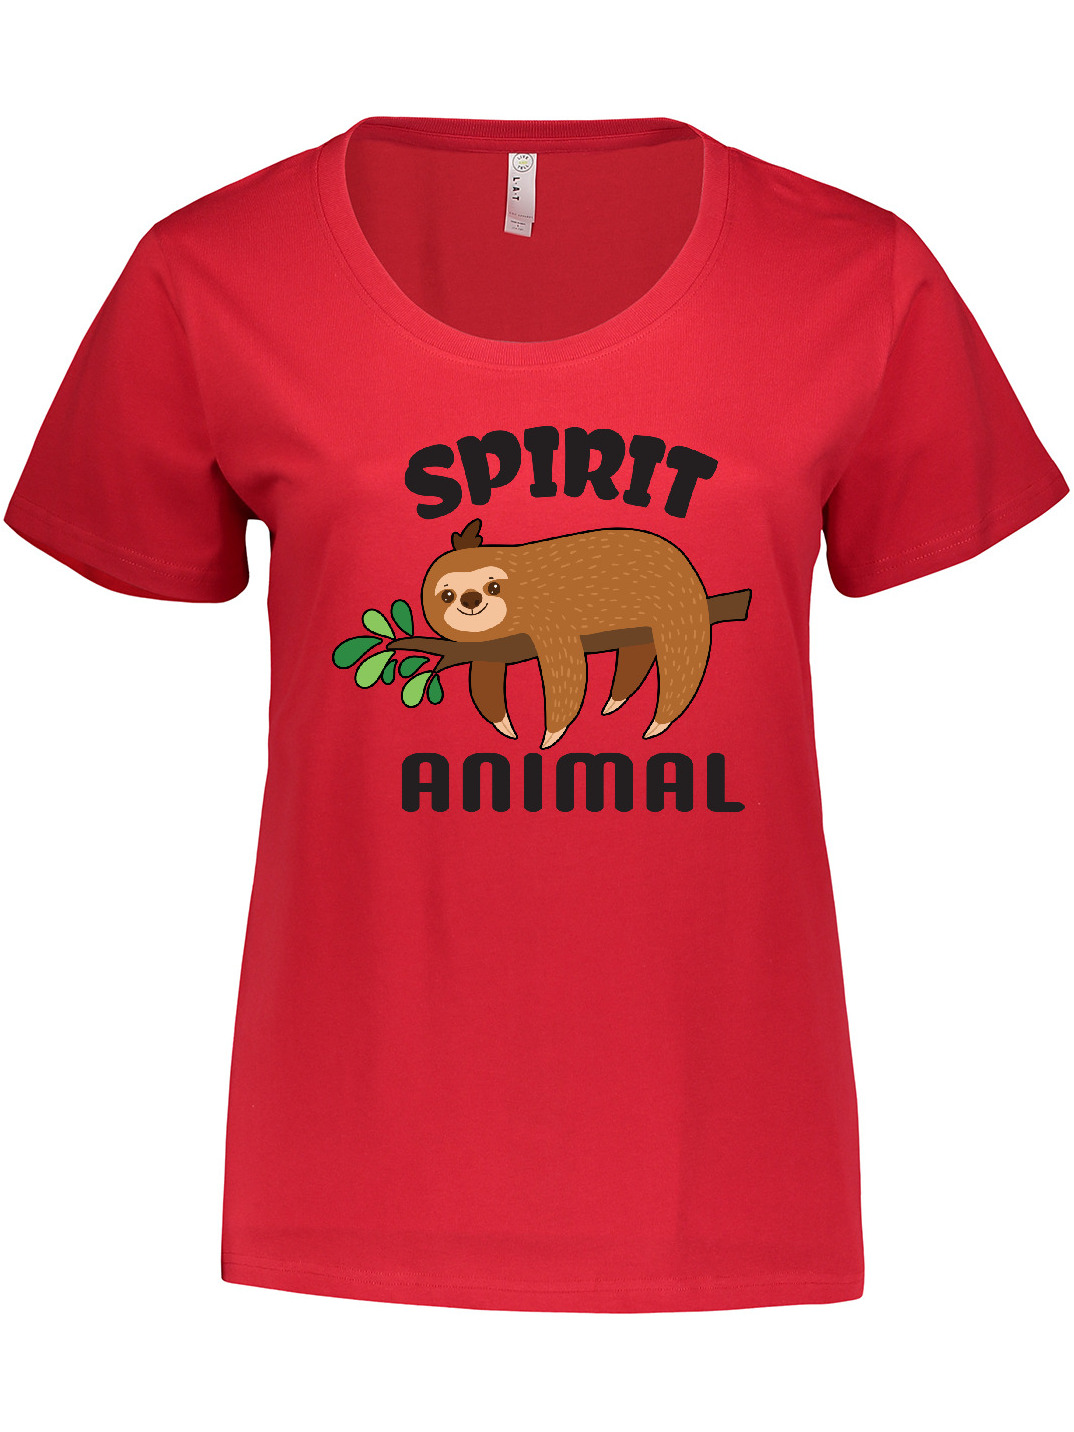 Inktastic My Spirit Animal is a Sloth with Sloth Illustration Women's Plus Size T-Shirt - image 1 of 4